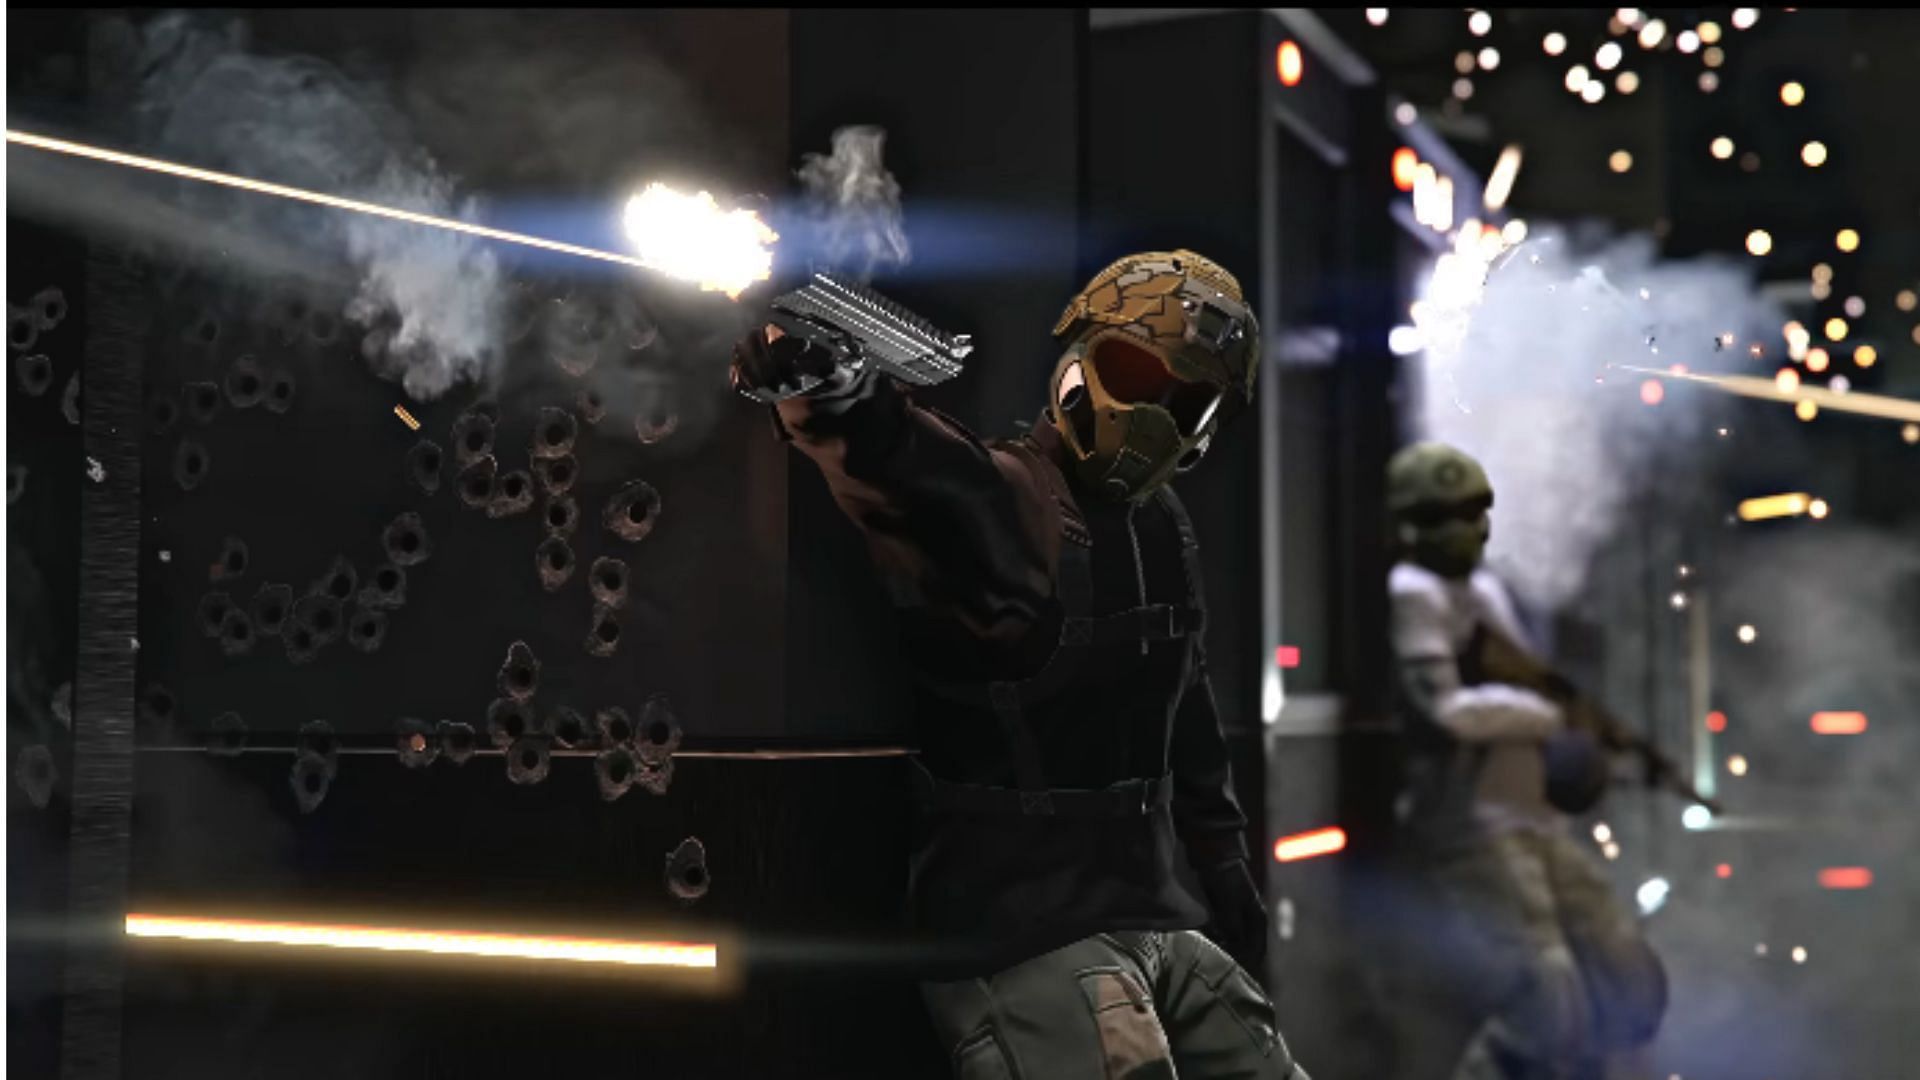 The tactical SMG in action (Image via YouTube/Rockstar Games)